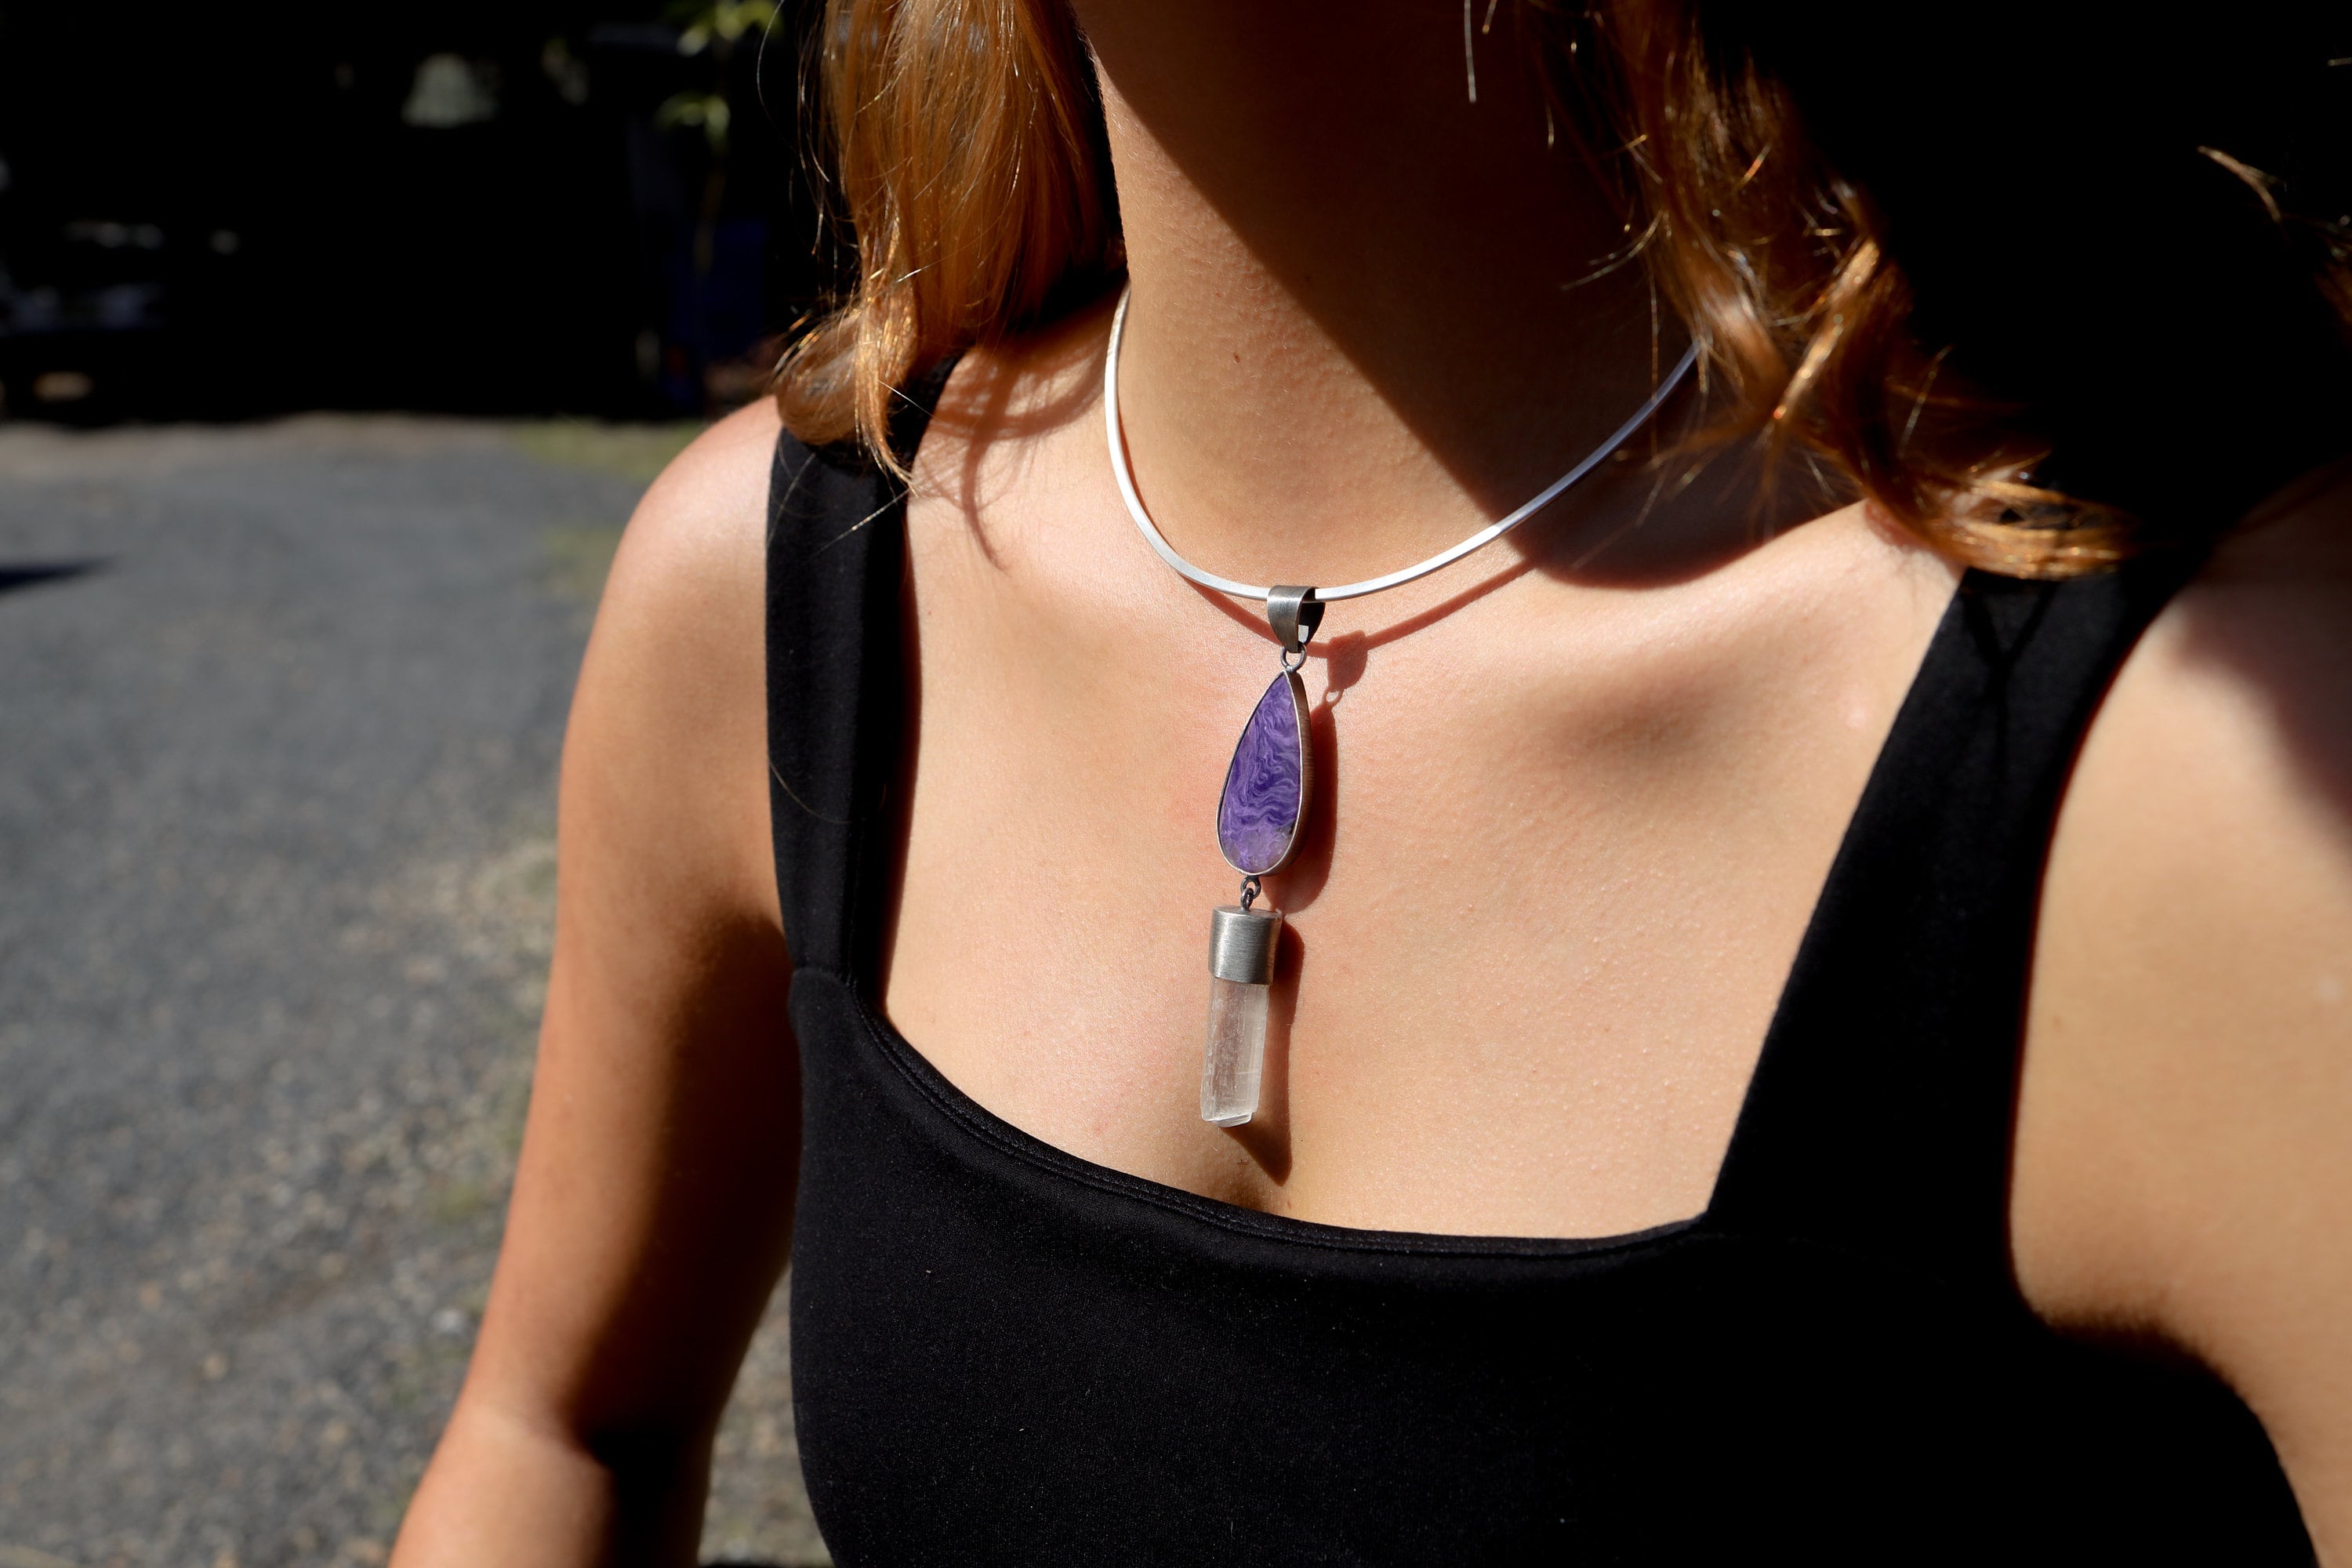 Crystal Candle - AAA Charoite Cabochon & Optical Selenite - Sterling Silver - Rustic OXEDISED Finish - Pendant